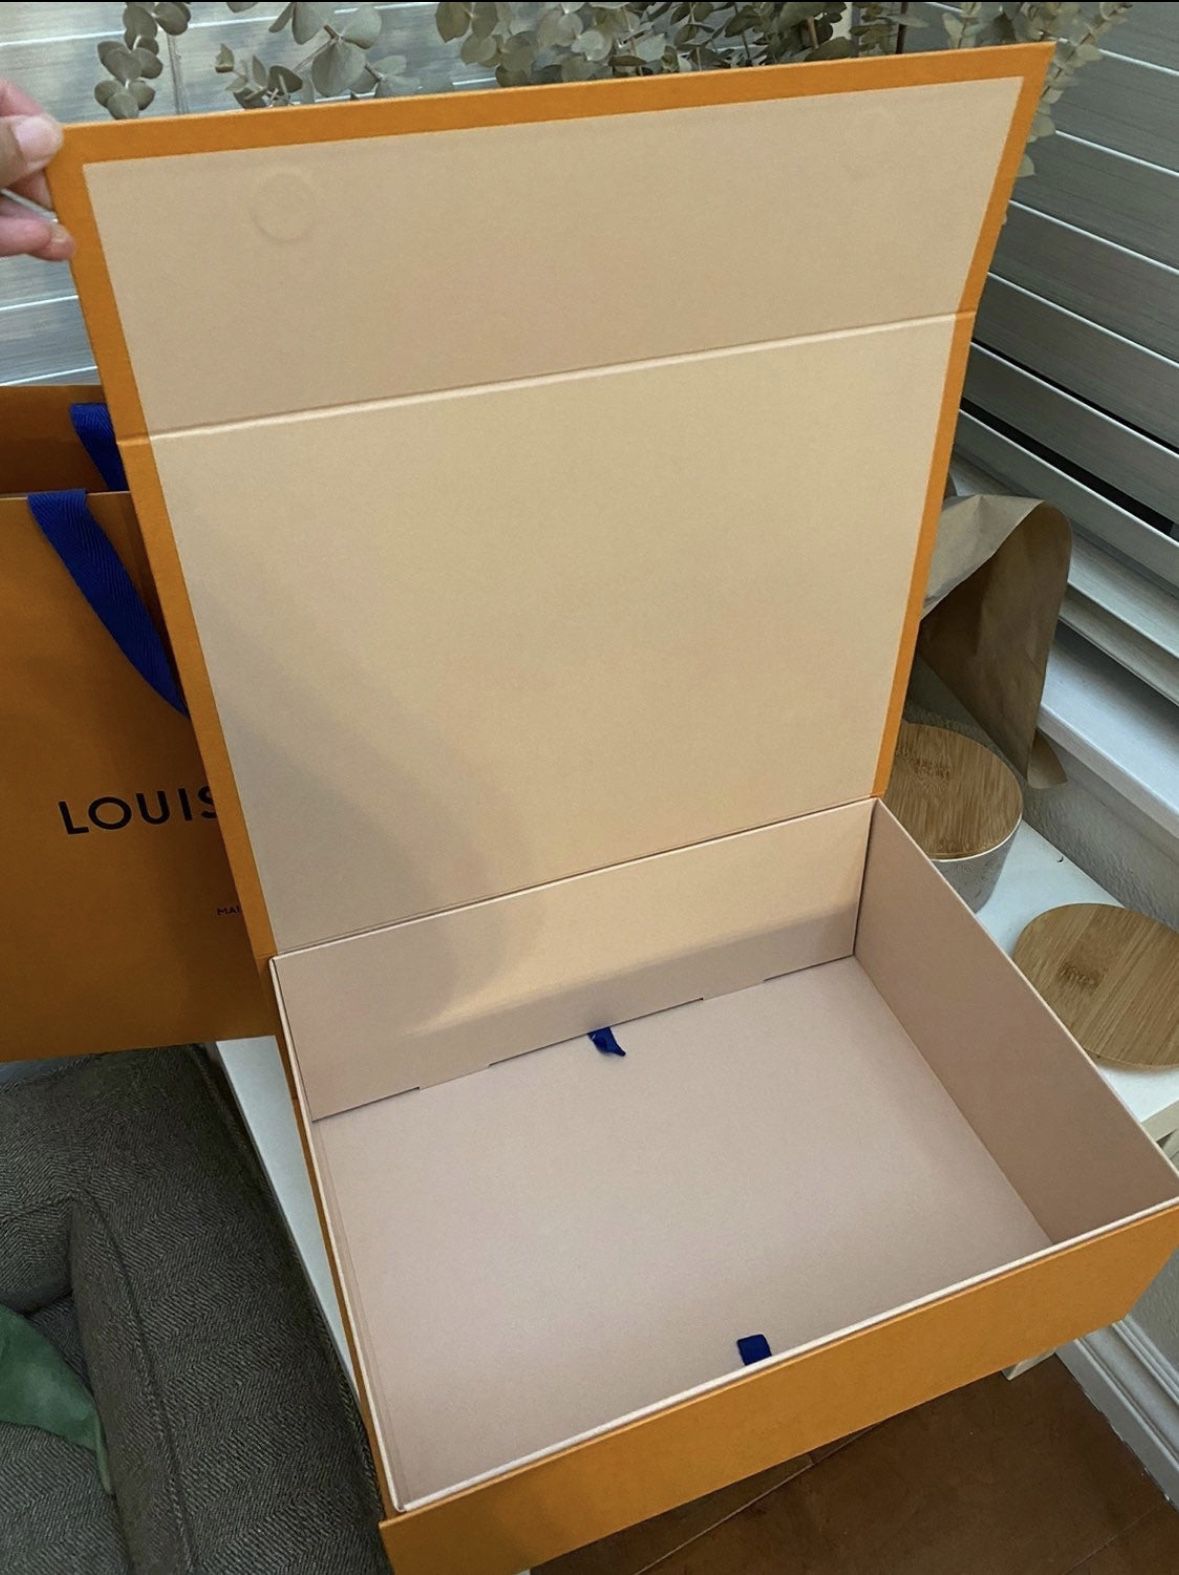 Vintage Louis Vuitton Brown Gift Box for Sale in Seattle, WA - OfferUp